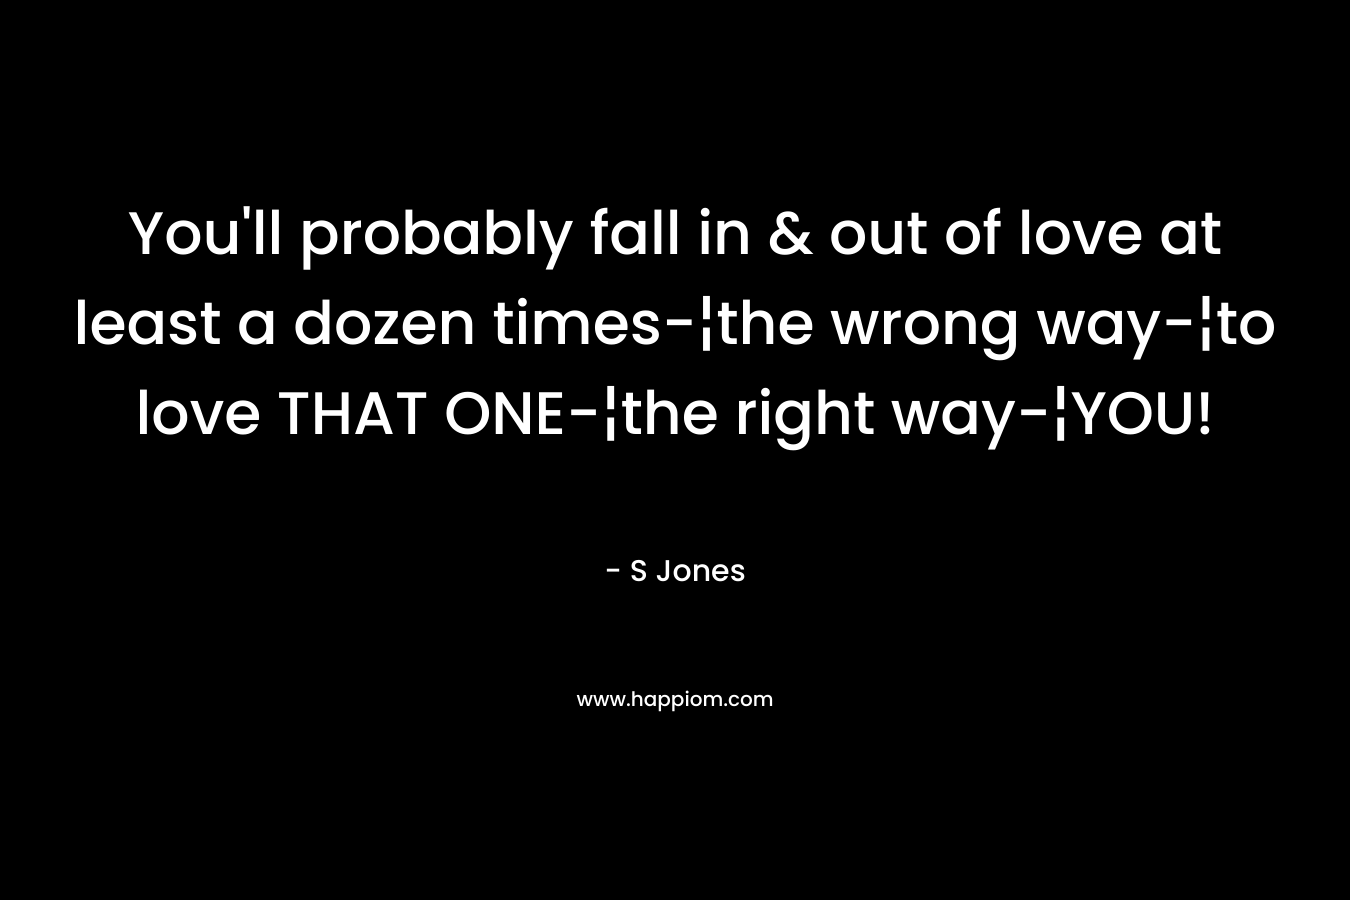 You'll probably fall in & out of love at least a dozen times-¦the wrong way-¦to love THAT ONE-¦the right way-¦YOU!